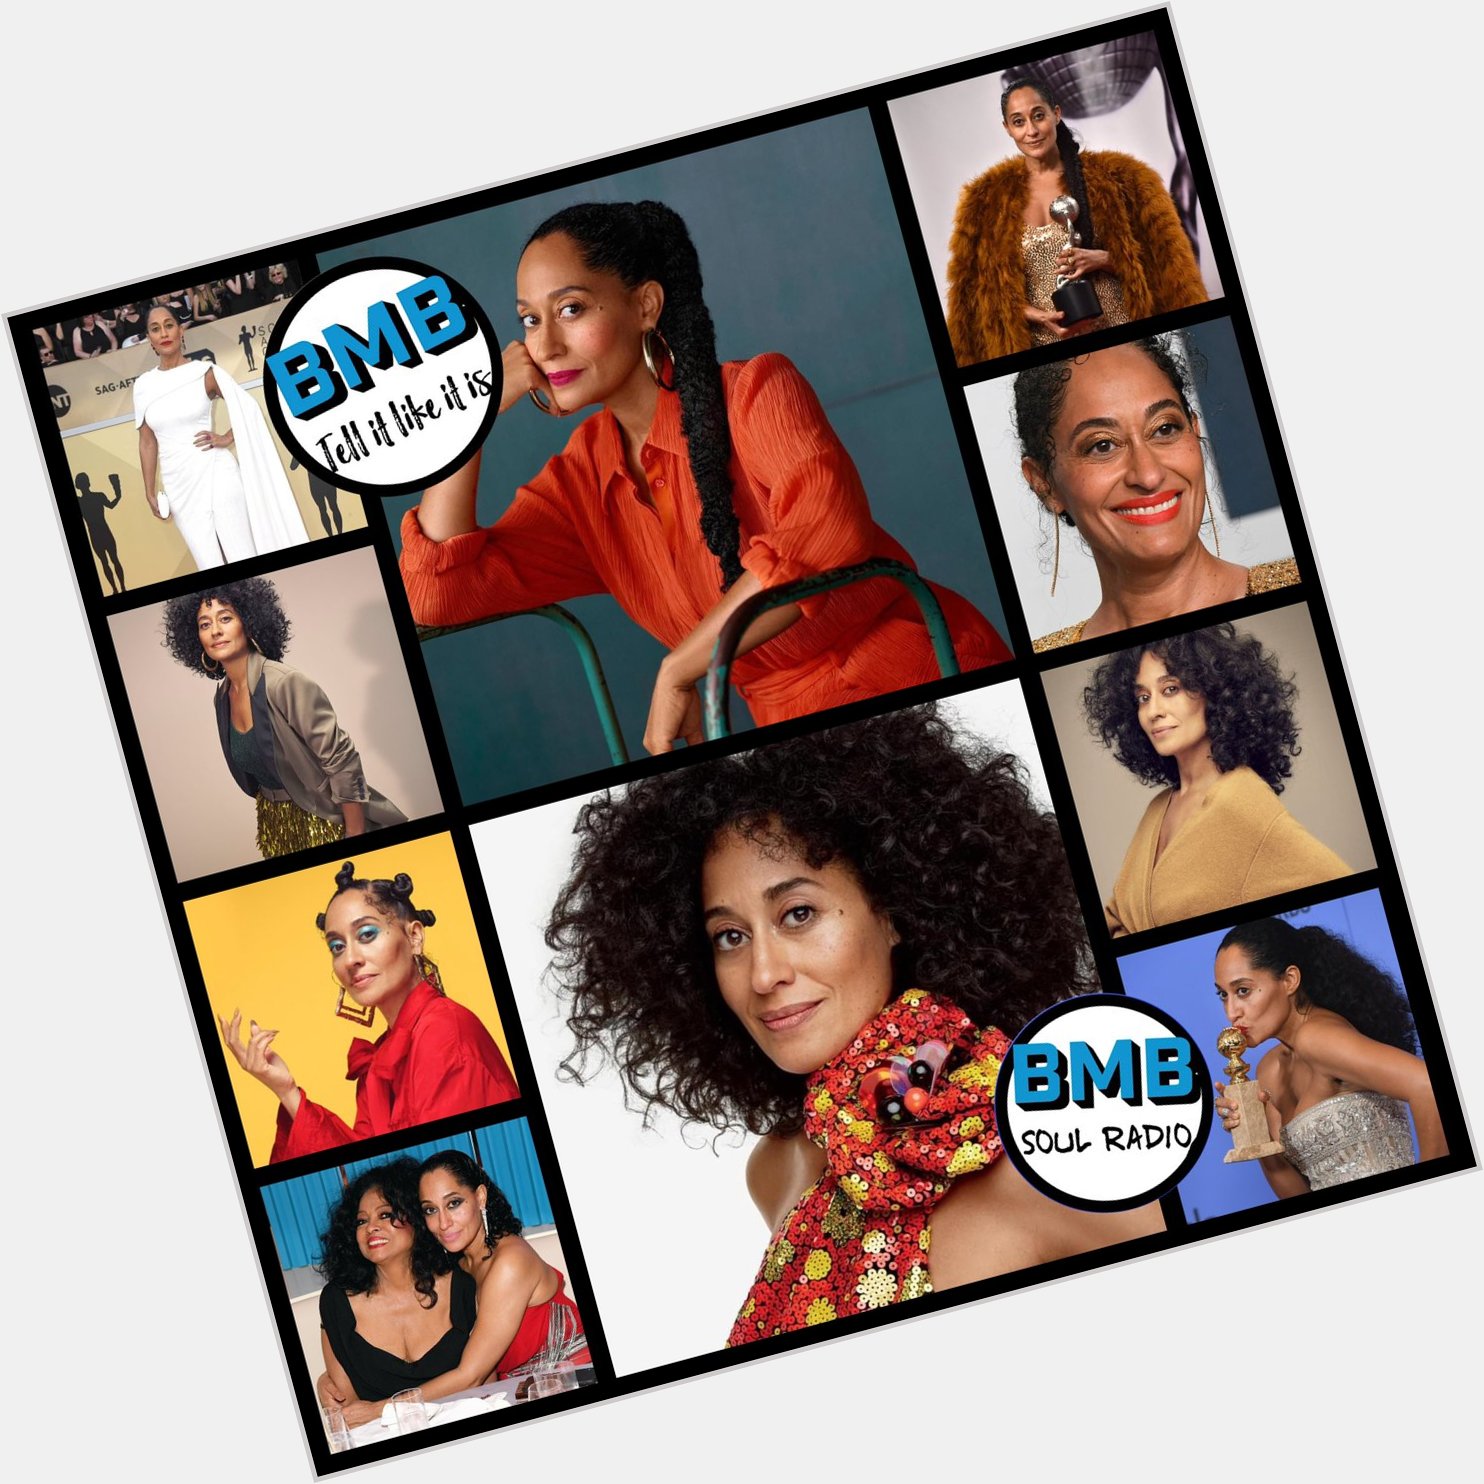      Happy Birthday Tracee Ellis Ross!
She Is 50 Today!    